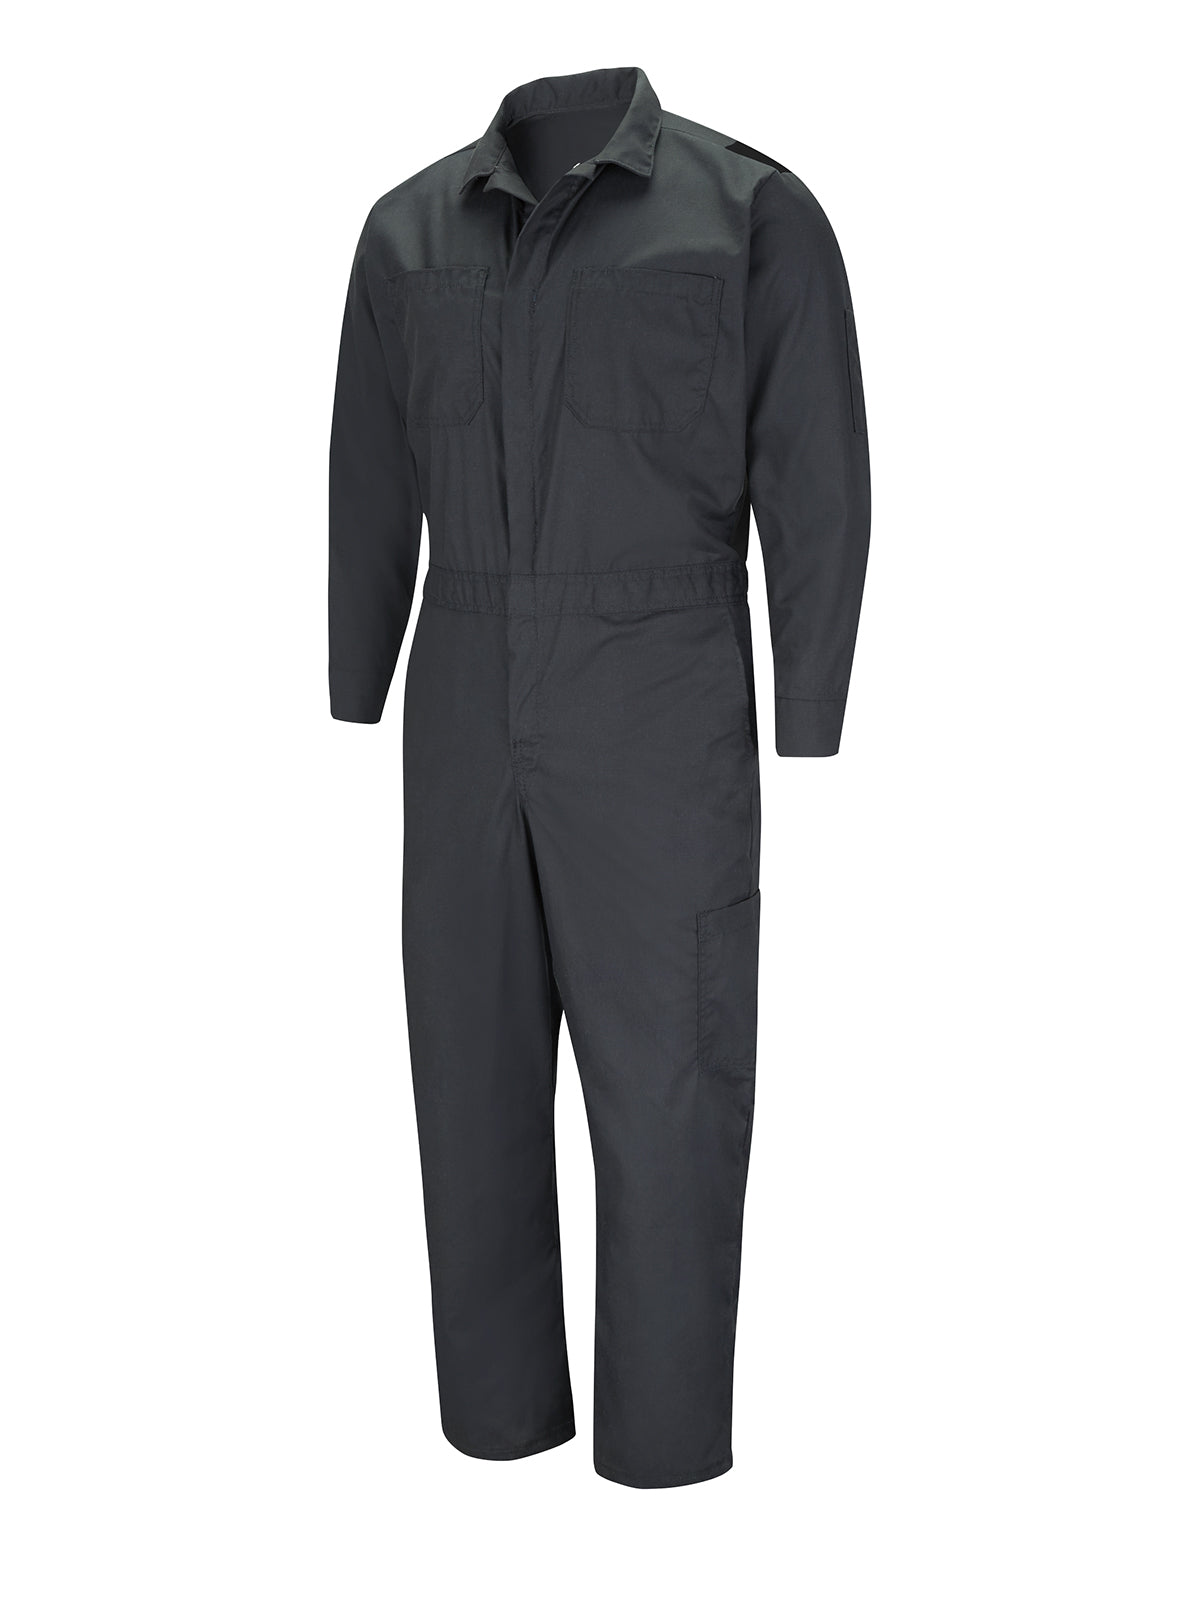 Unisex Performance Plus Lightweight Coverall with OilBlok Technology